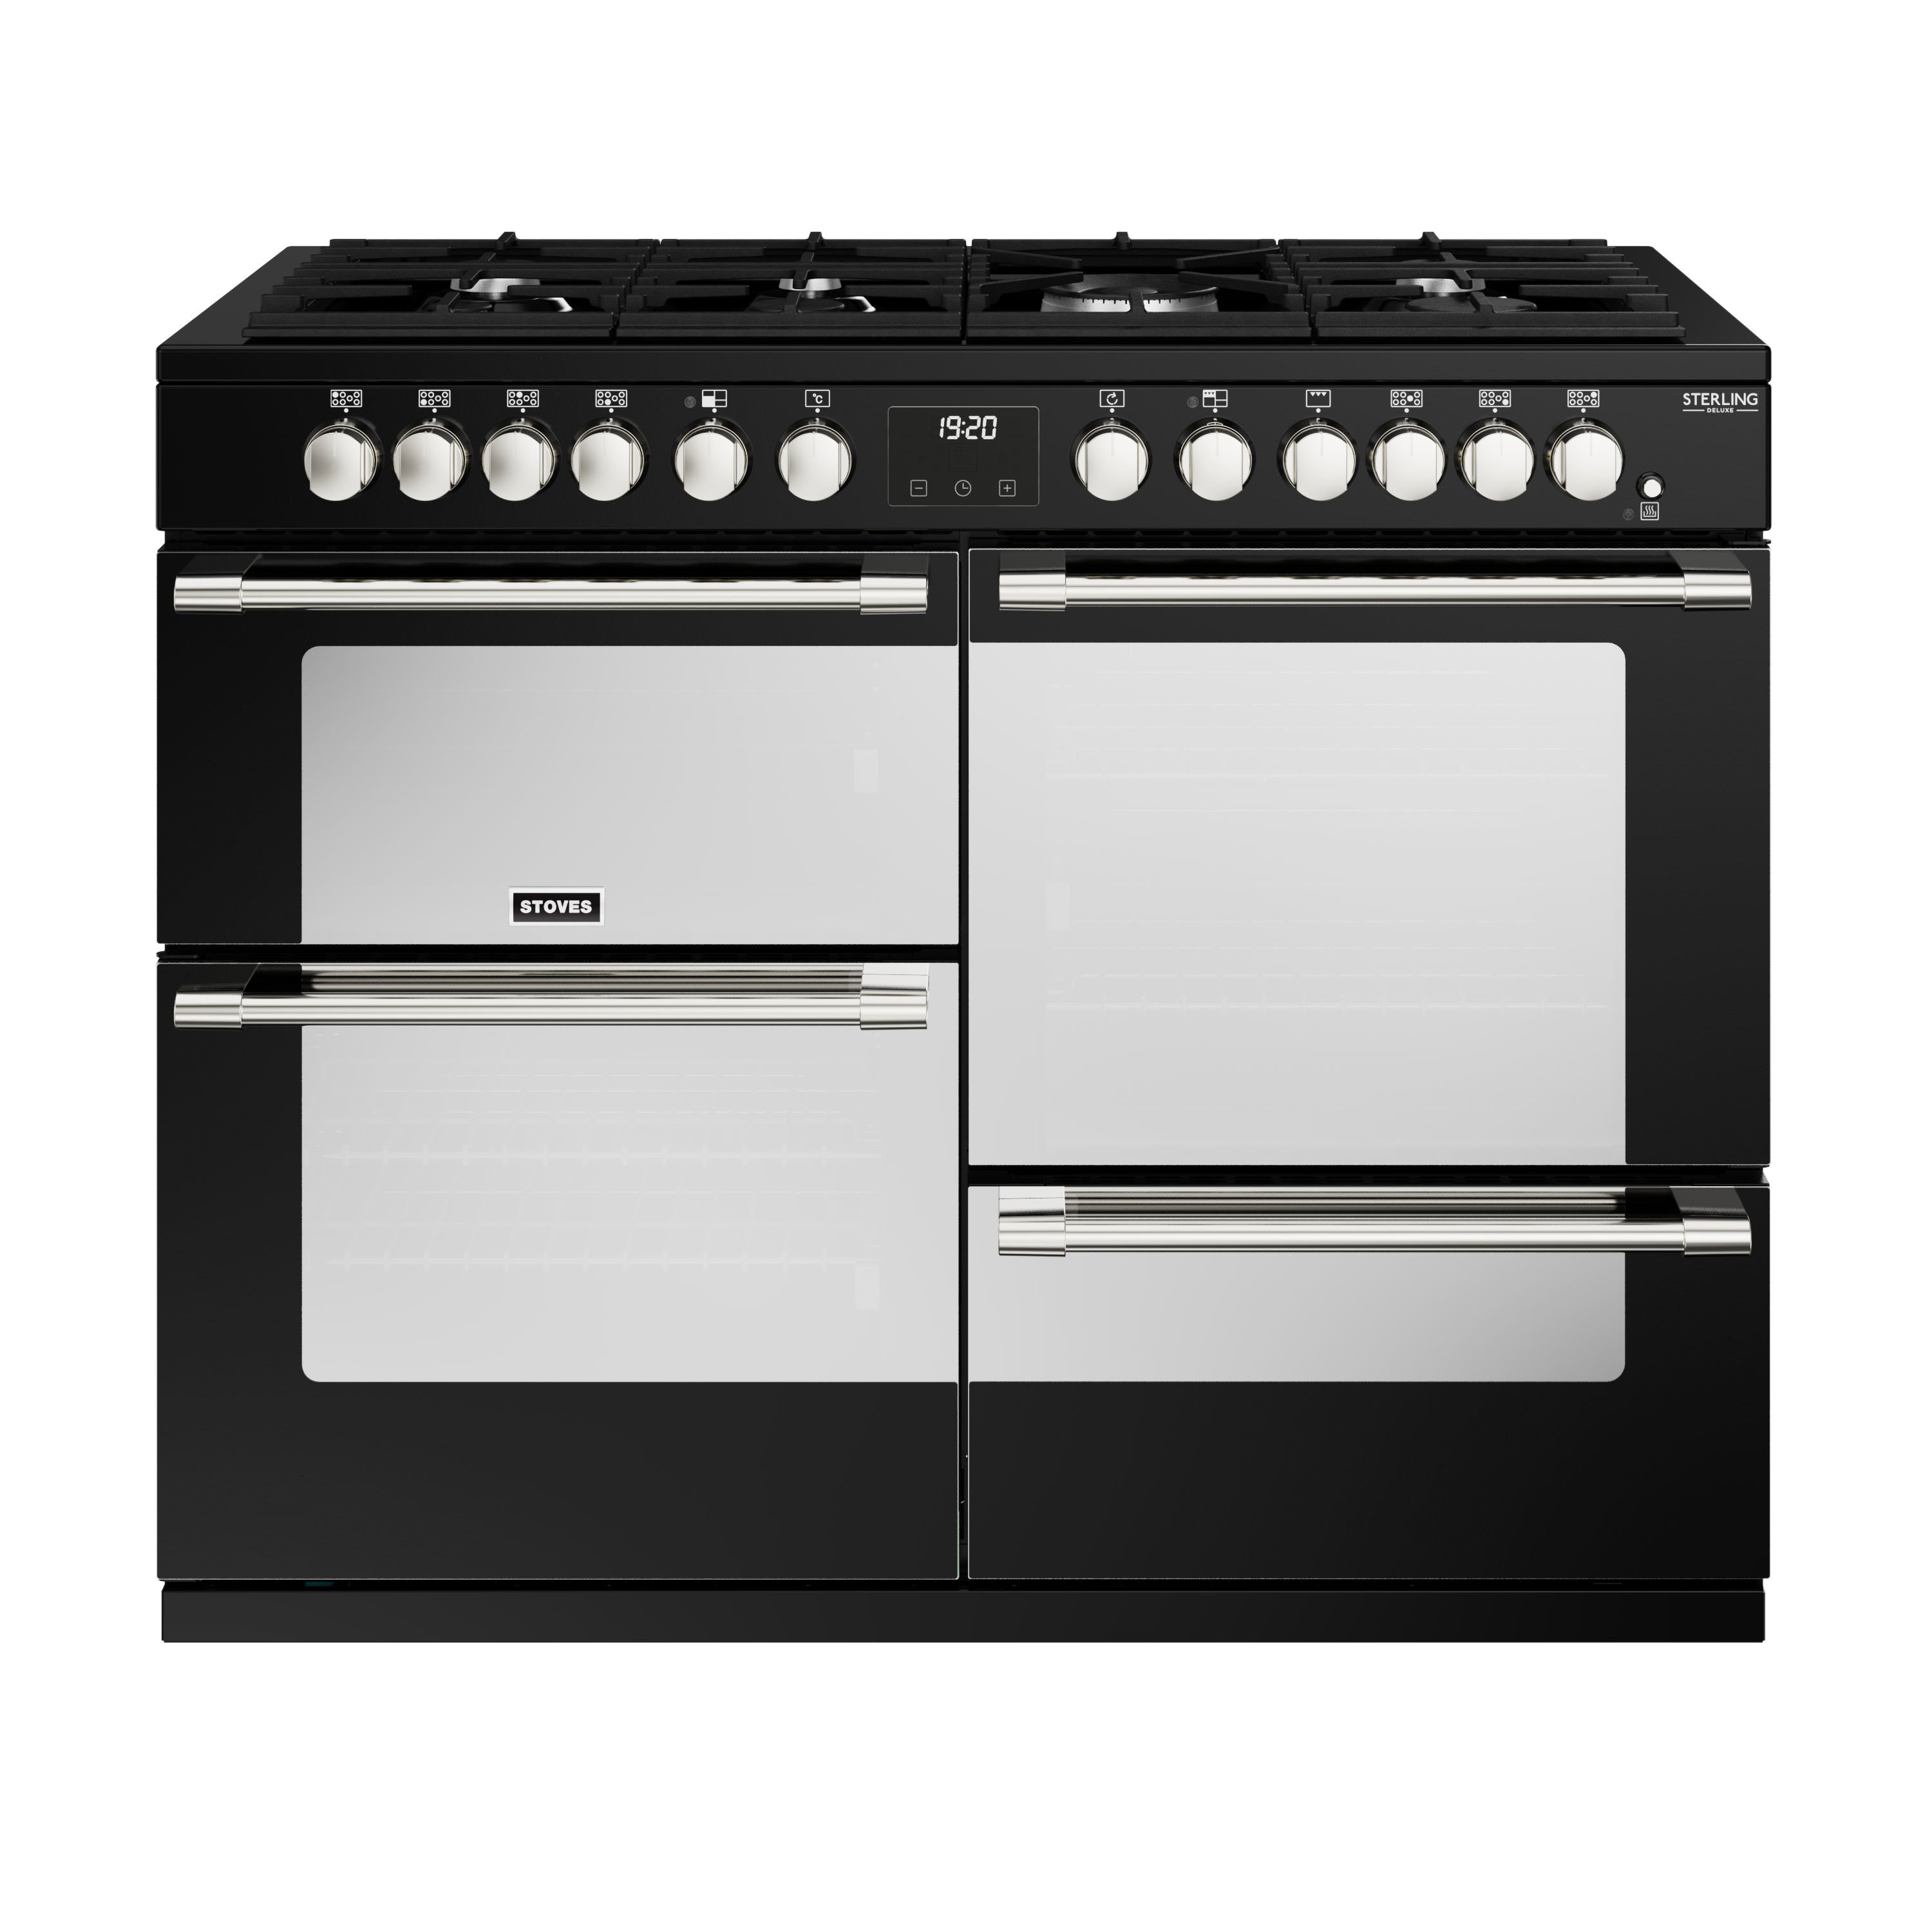 110cm dual fuel range cooker with a 7 burner gas hob, conventional oven & grill, multifunction main oven with TrueTemp digital thermostat, fanned second oven and dedicated slow cook oven